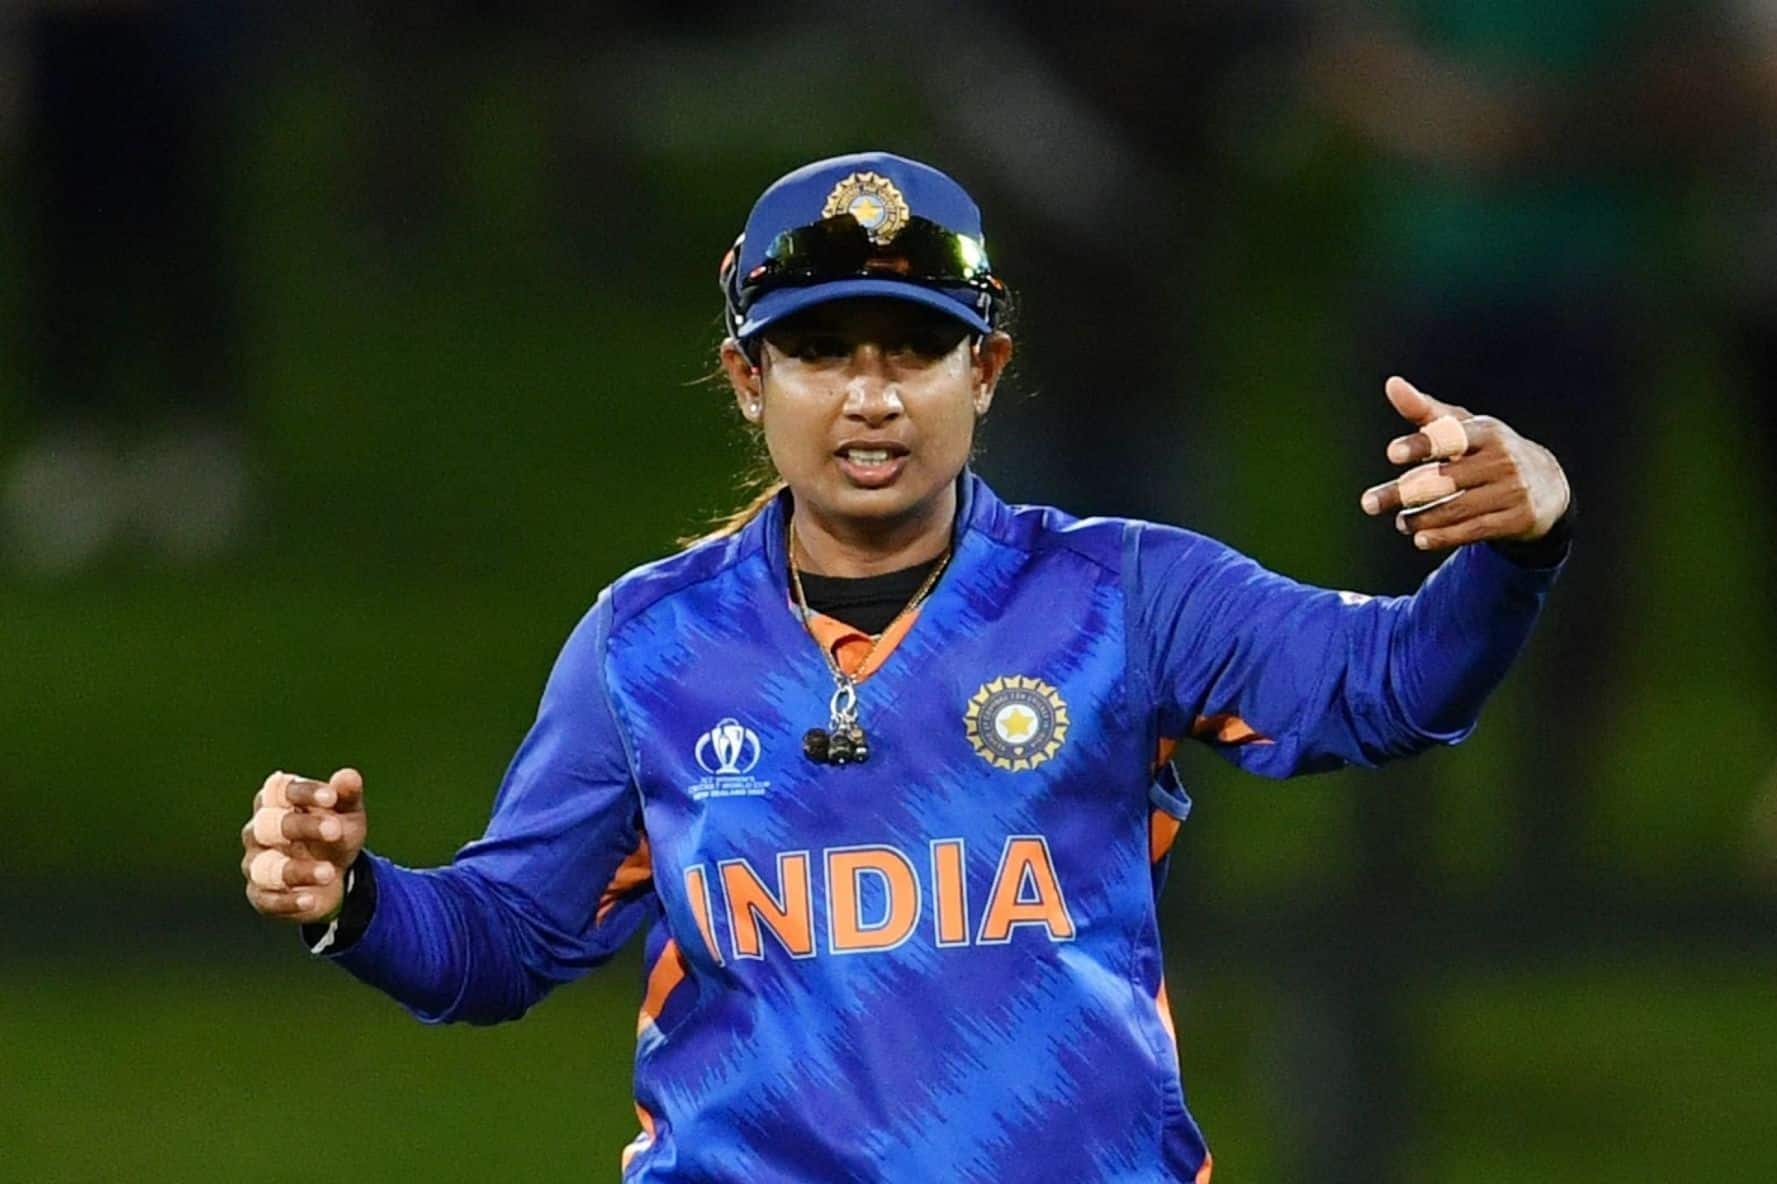 India's World Cup fate depends on the top-order: Former India captain